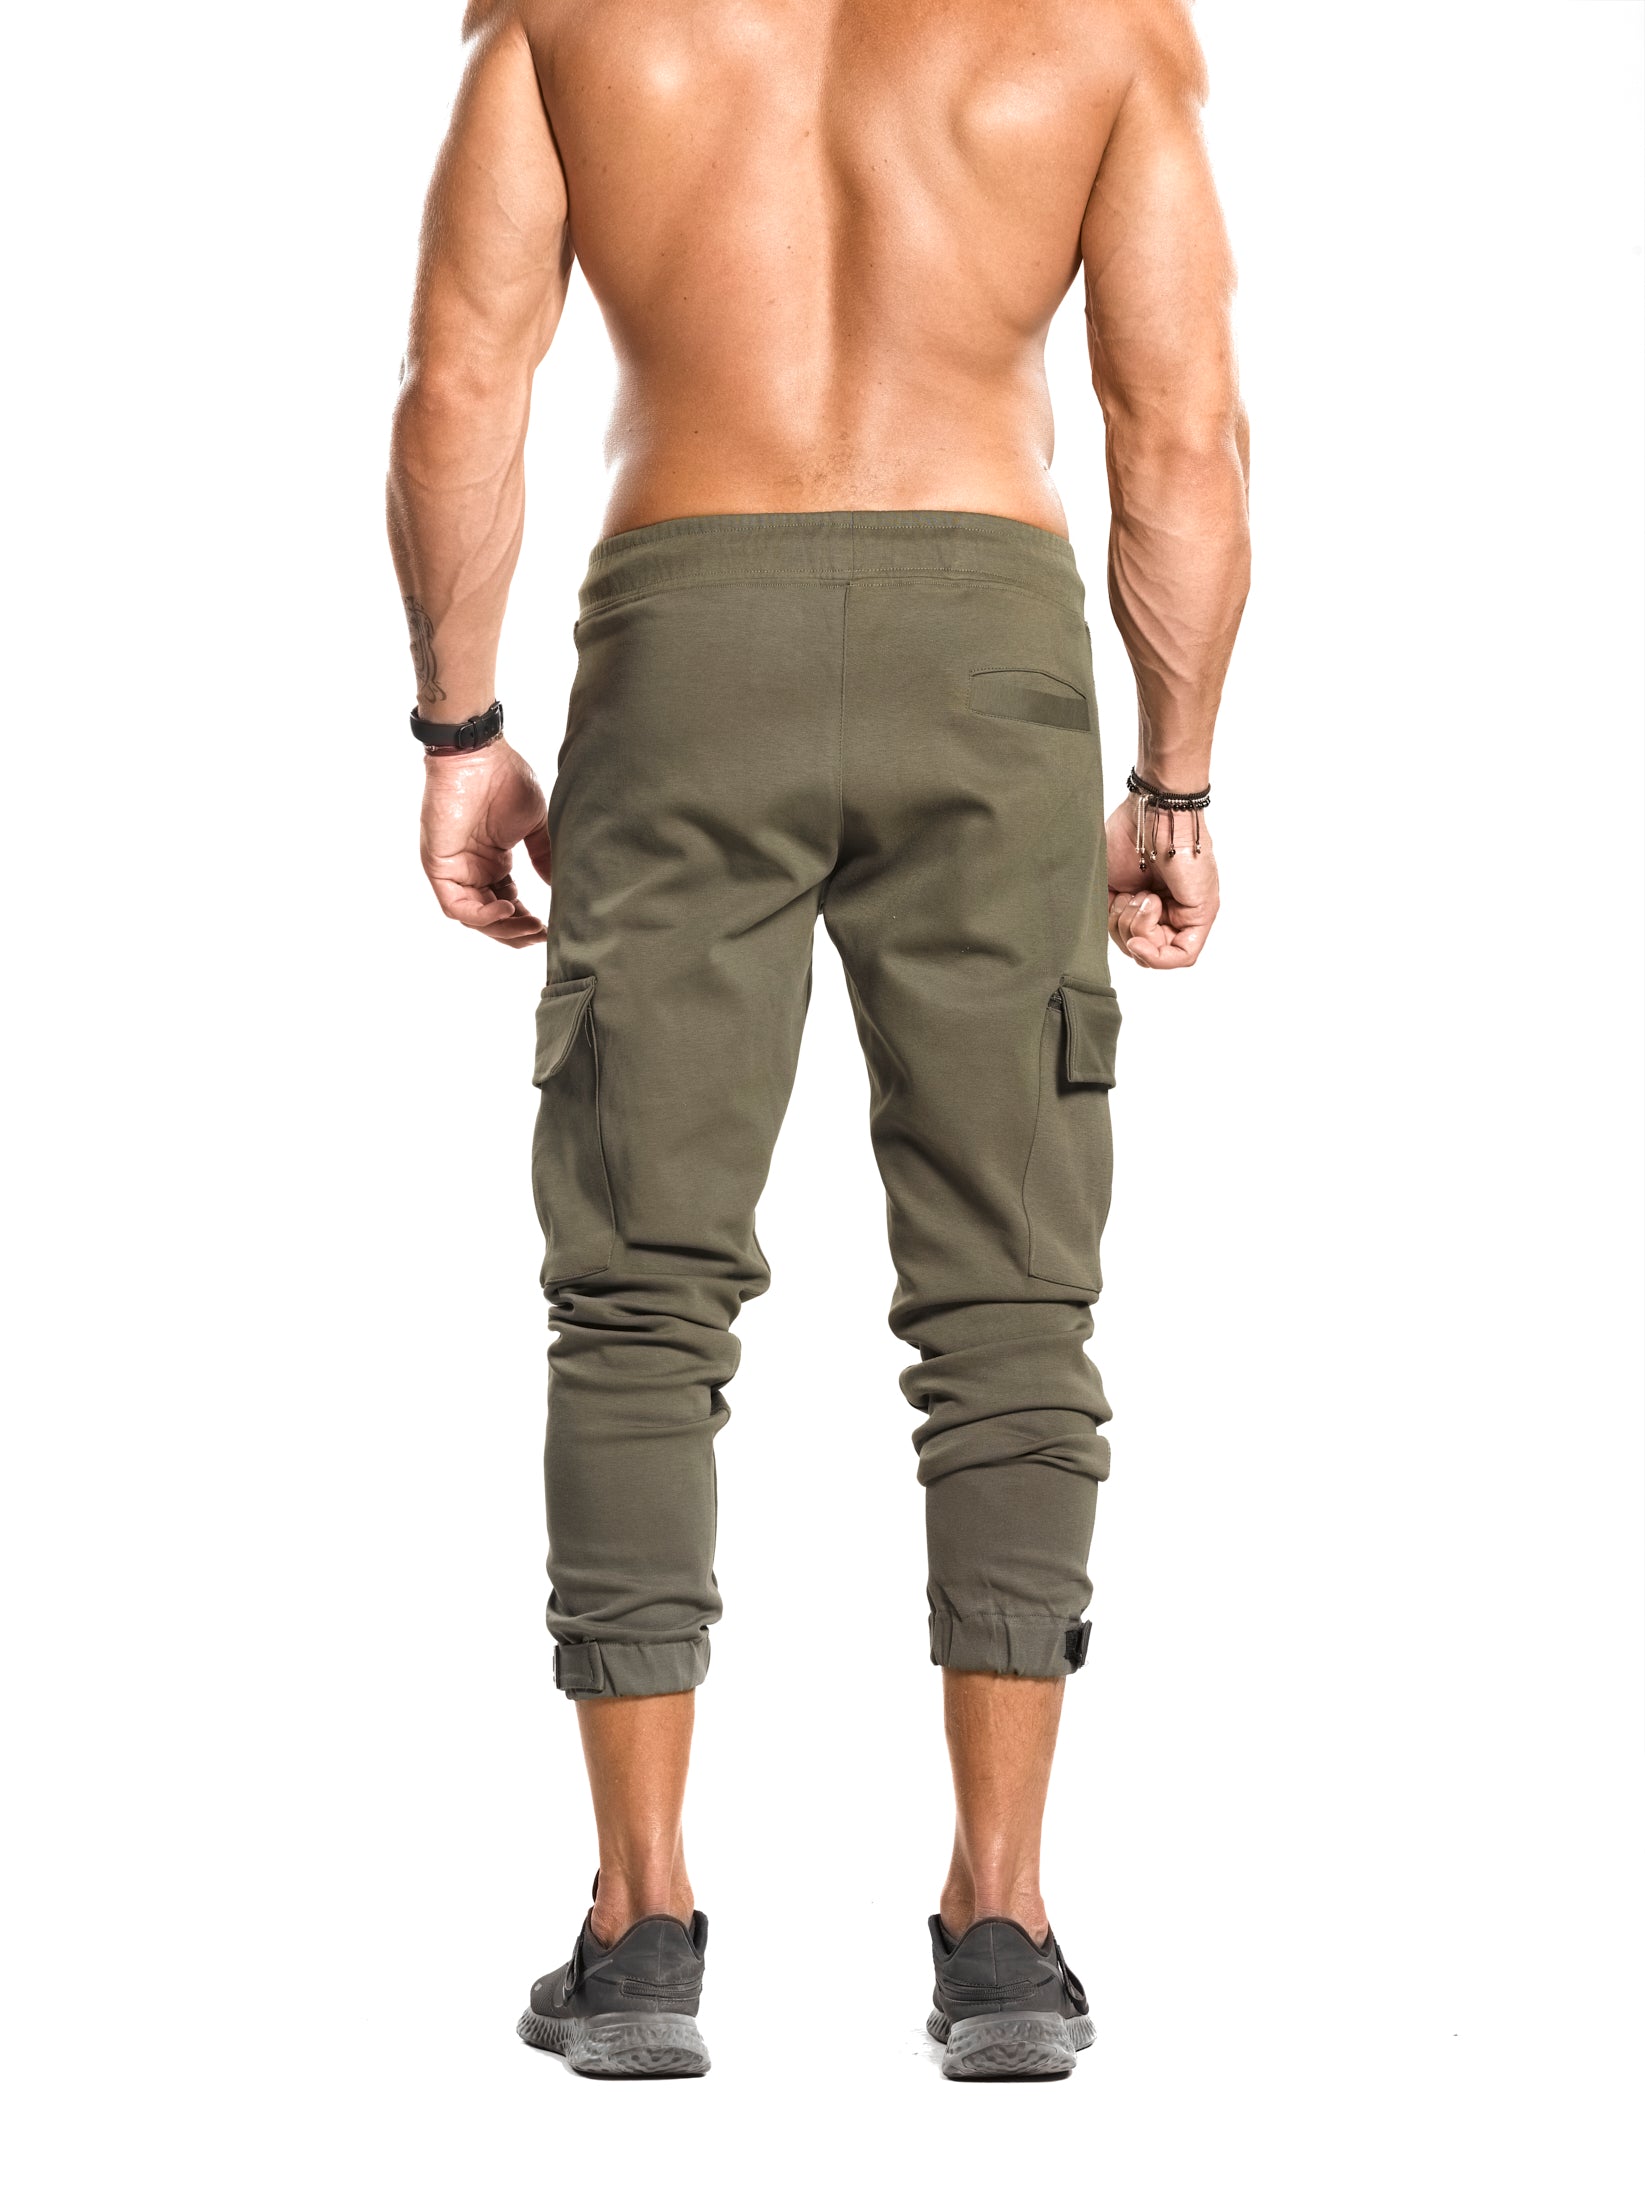 Cargo Joggers - ULTRA Perform-Gear [Olive Green] Very Limited Pieces - Sweatpants/Joggers - Gym Apparel Egypt